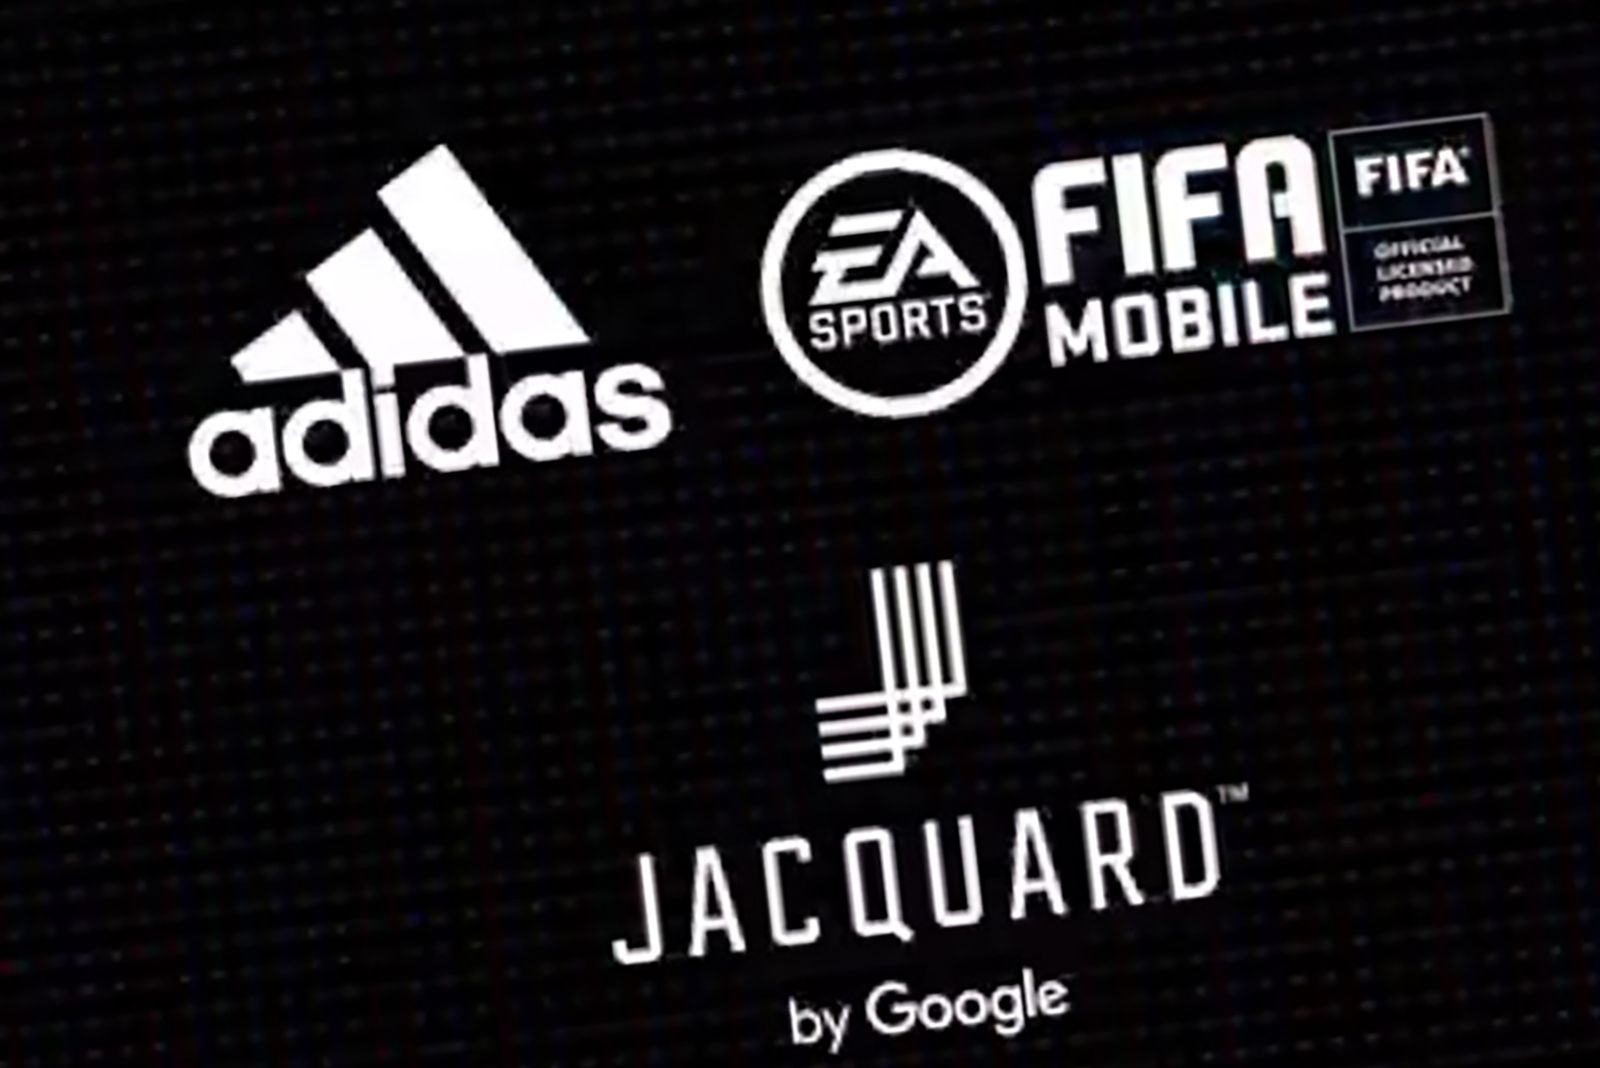 Google is working with EA and Adidas on new Jacquard products image 1